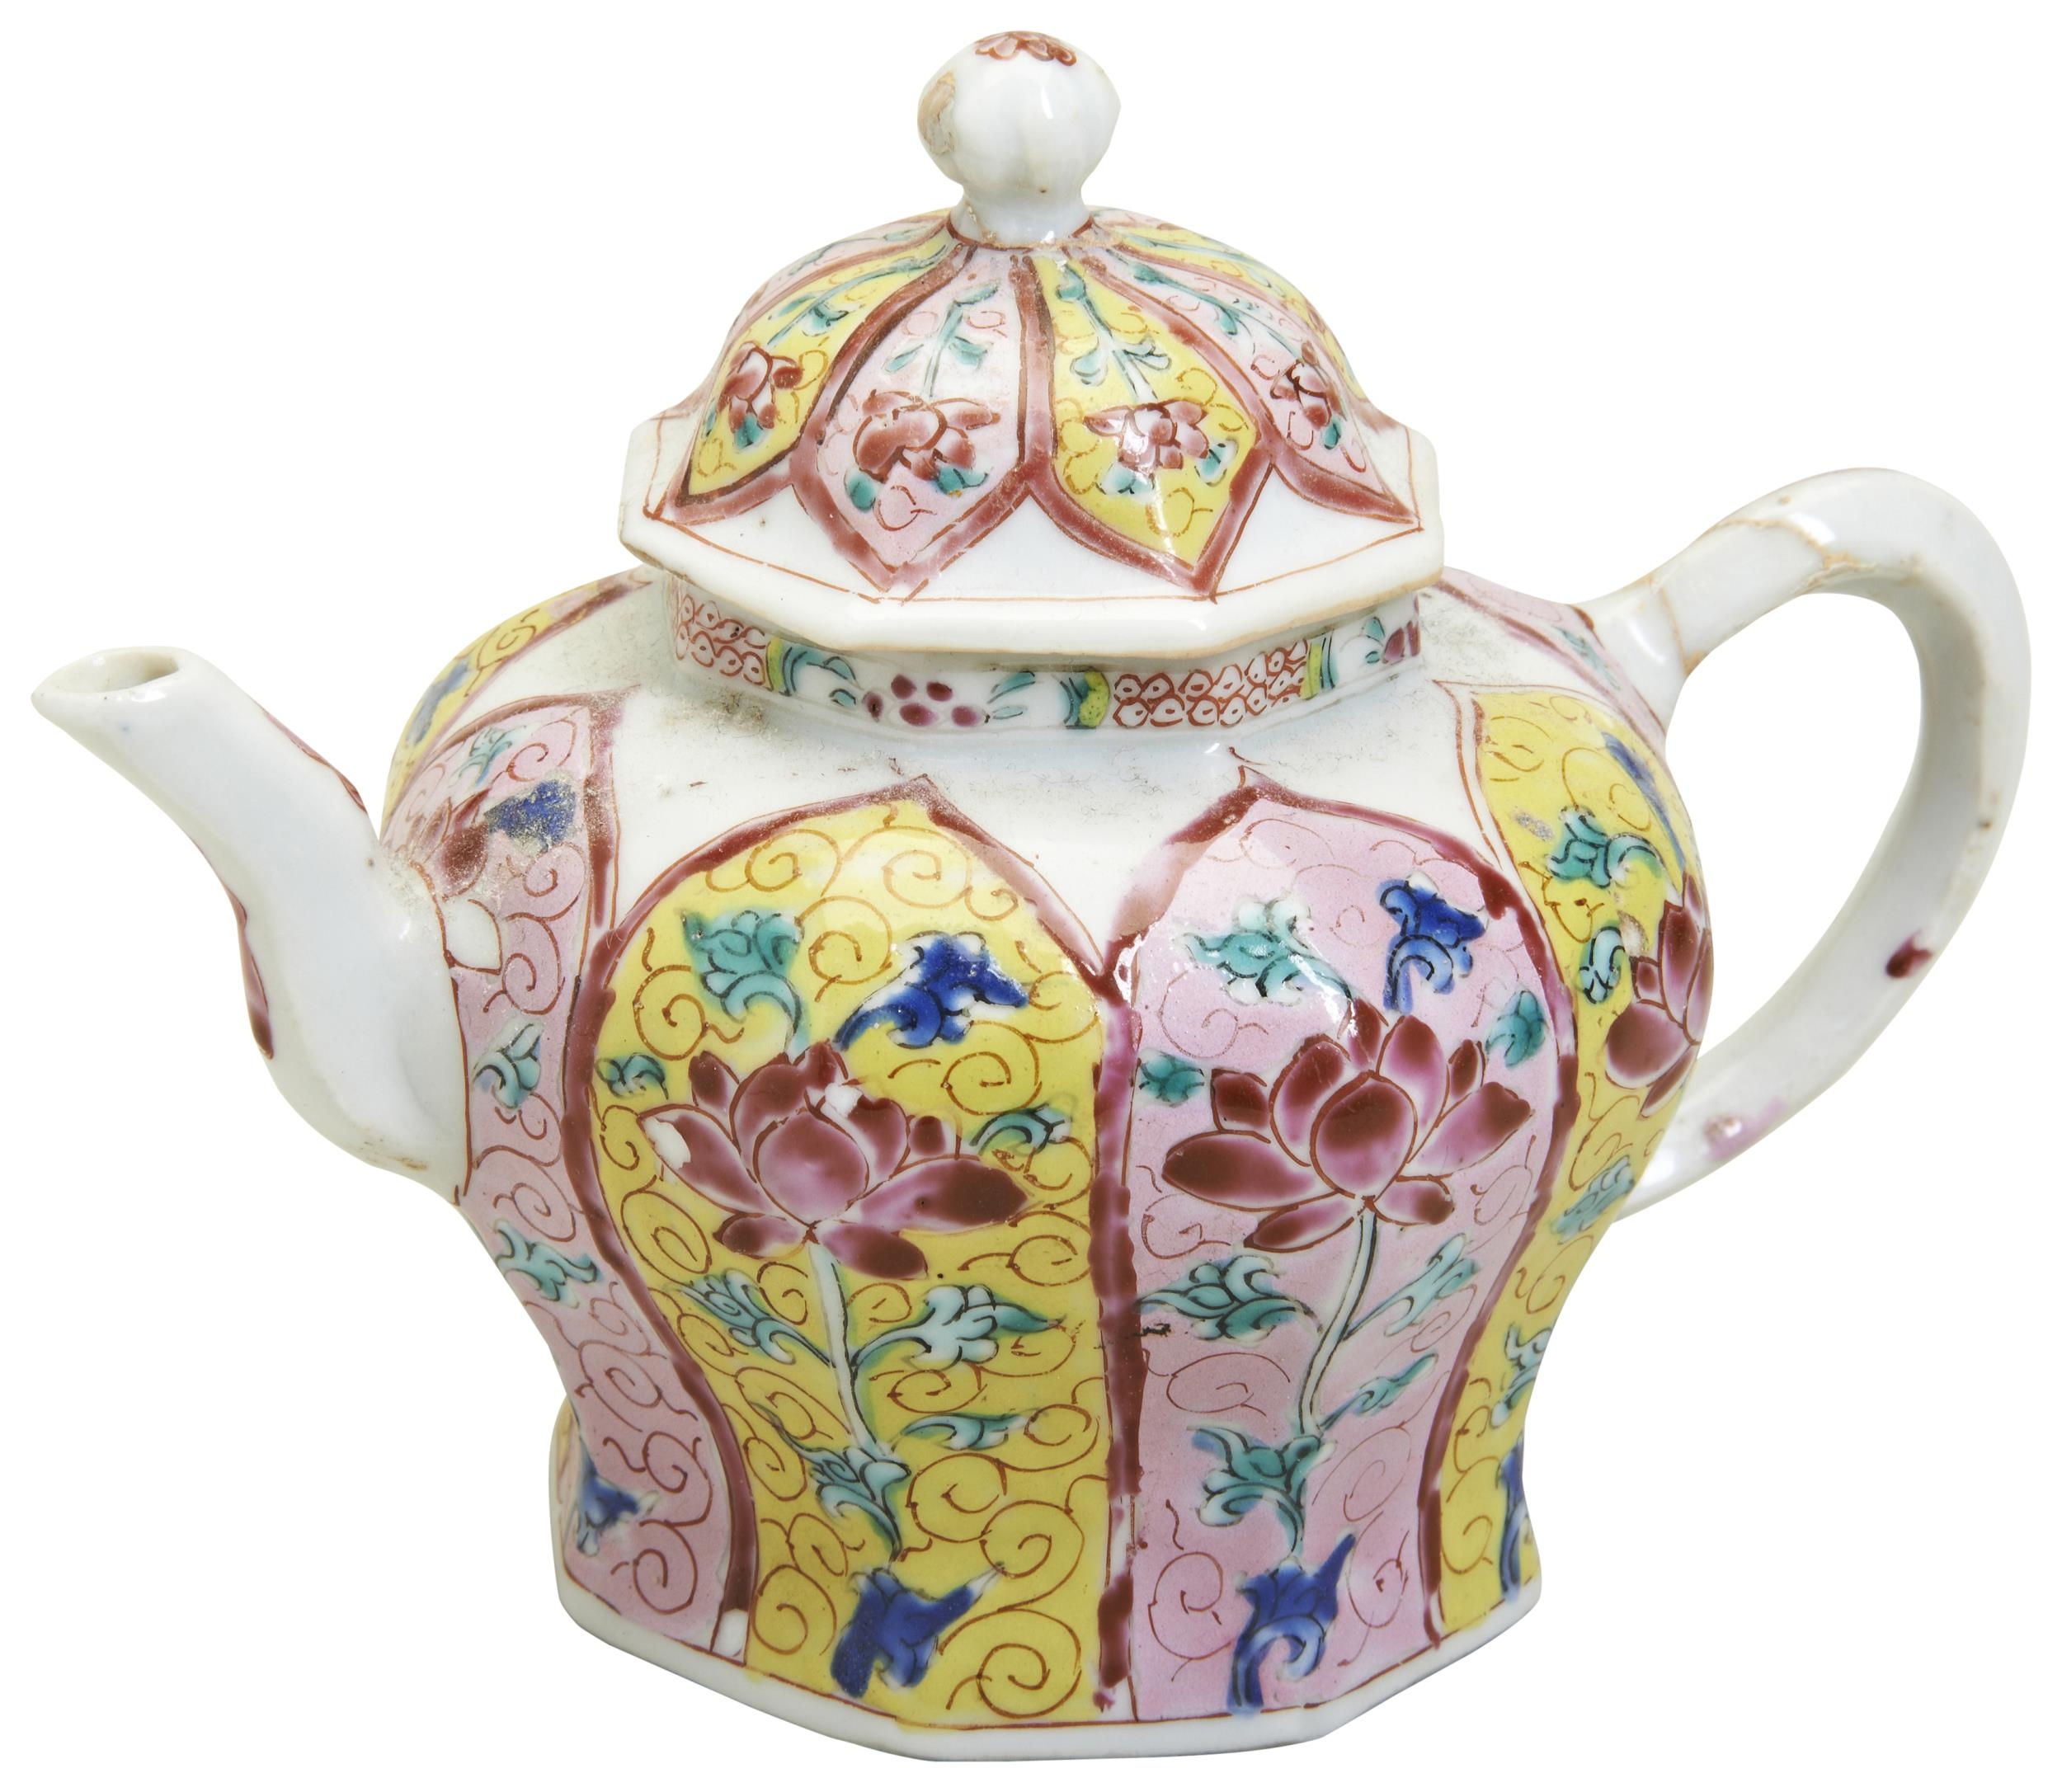 A CHINESE EXPORT FAMILLE ROSE 'LOTUS' TEAPOT YONGZHENG PERIOD (1723-1735) 11cm high PROVENANCE: From